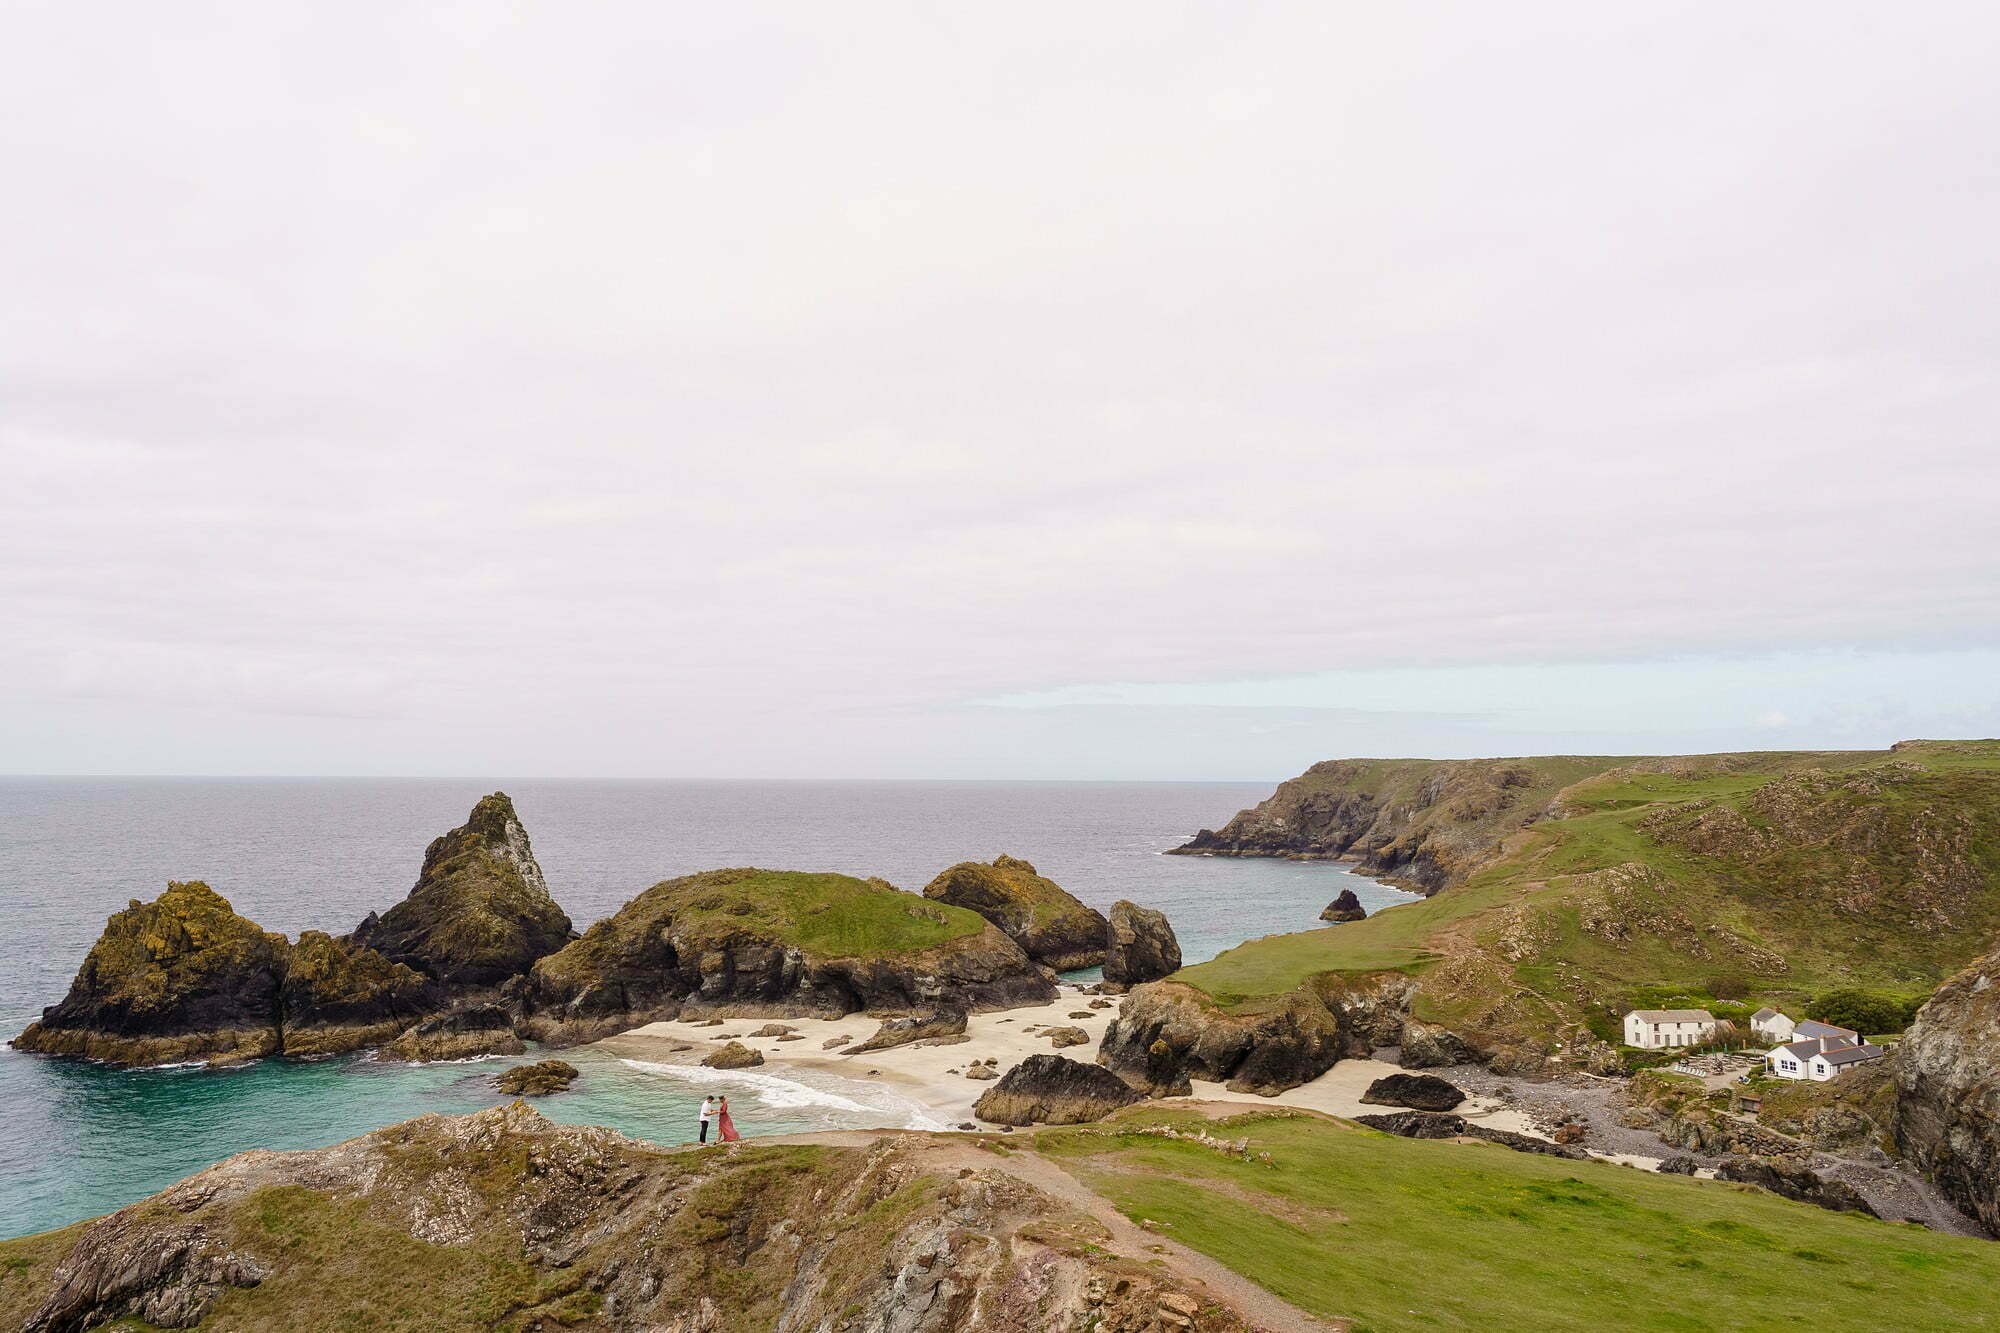 wedding photography with the view of the Kynance Cove cafe in the background